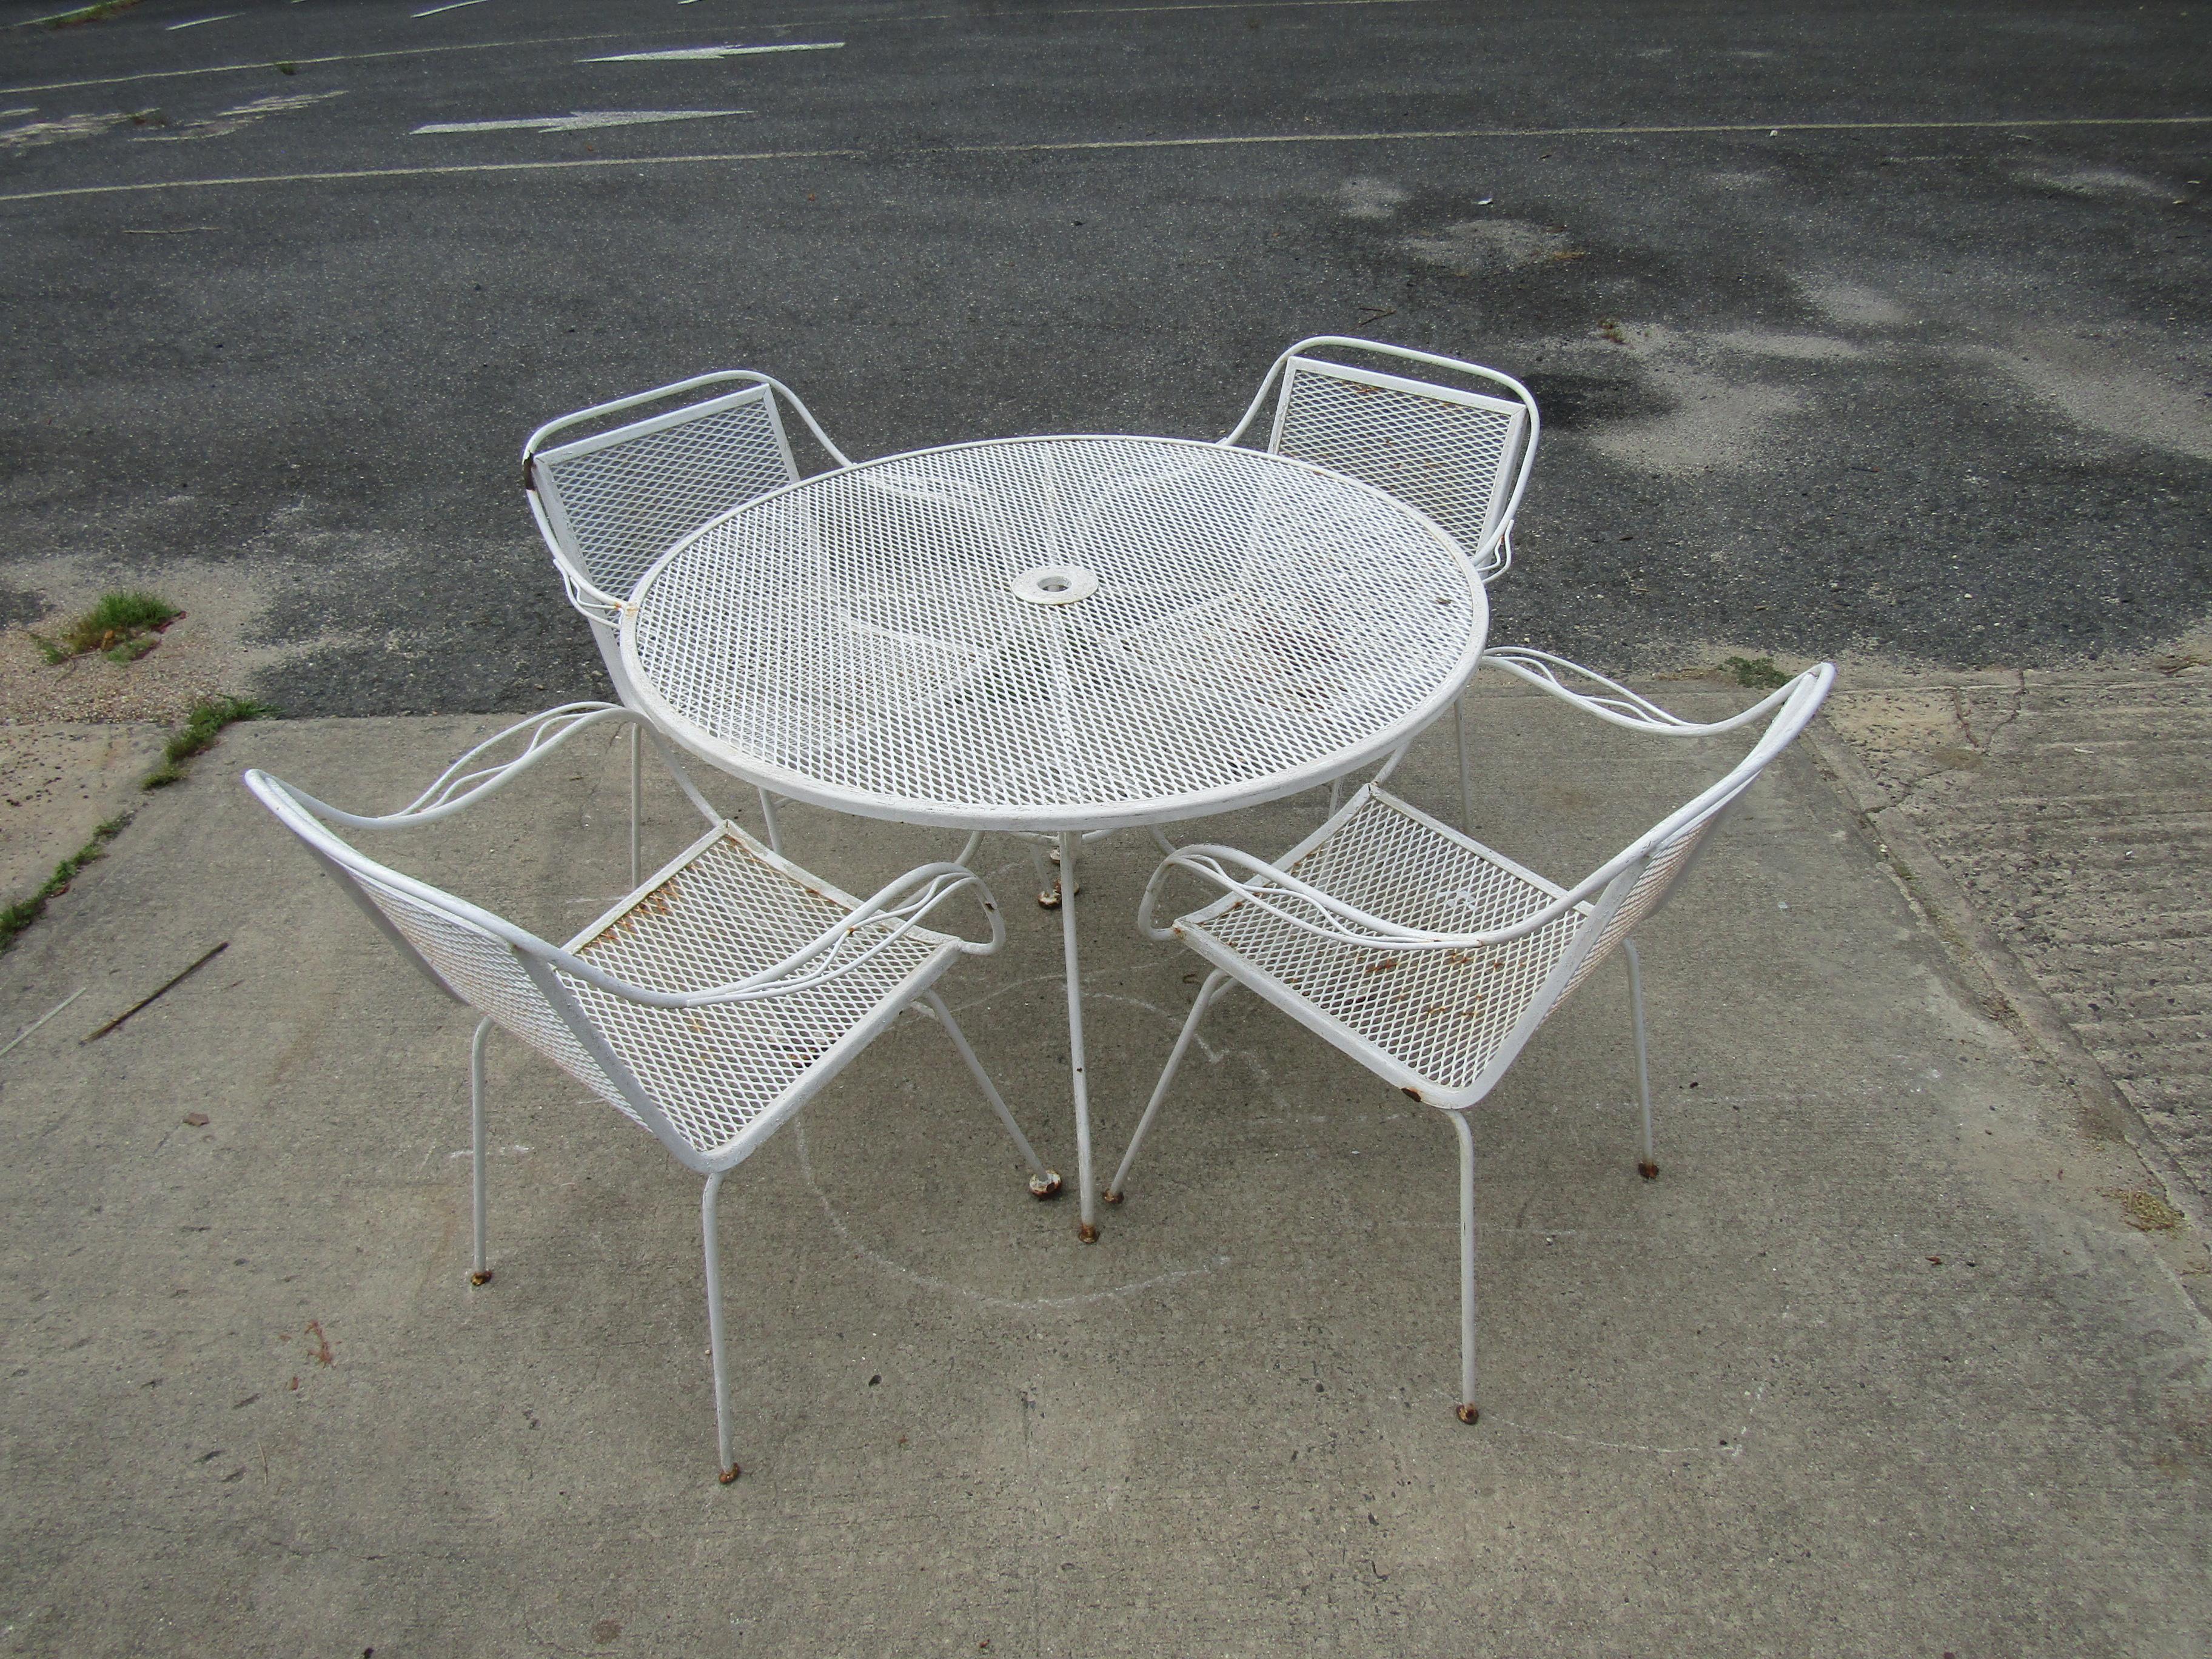 This vintage outdoor patio set, featuring four armchairs and a round table, all in painted metal material. Please confirm item location with seller (NY/NJ).

Dimensions:
Table- Diameter: 41